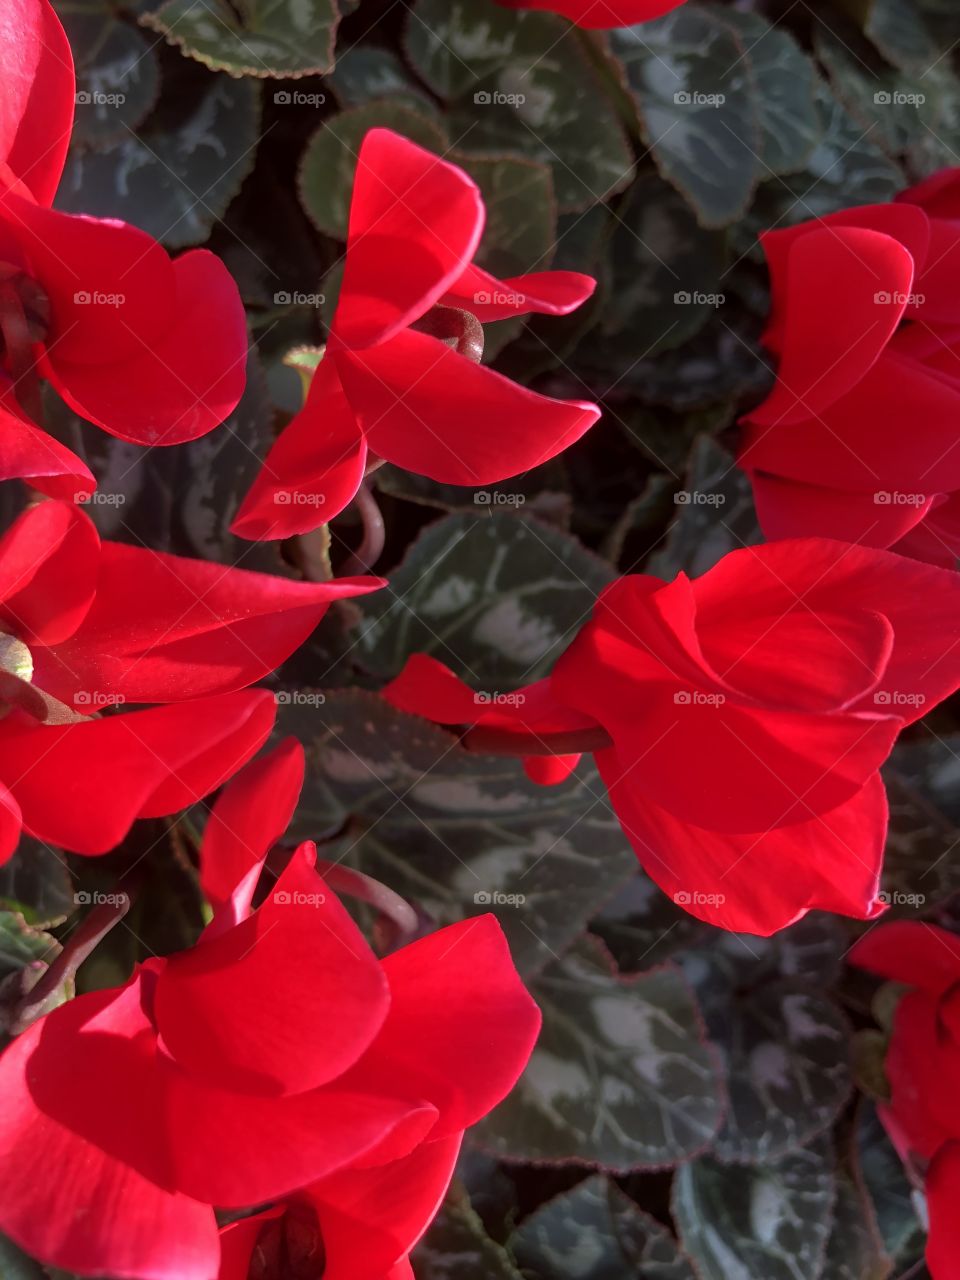 These cyclamen are fantastical, because that red is so massively appealing and very suitable for ones Valentine.